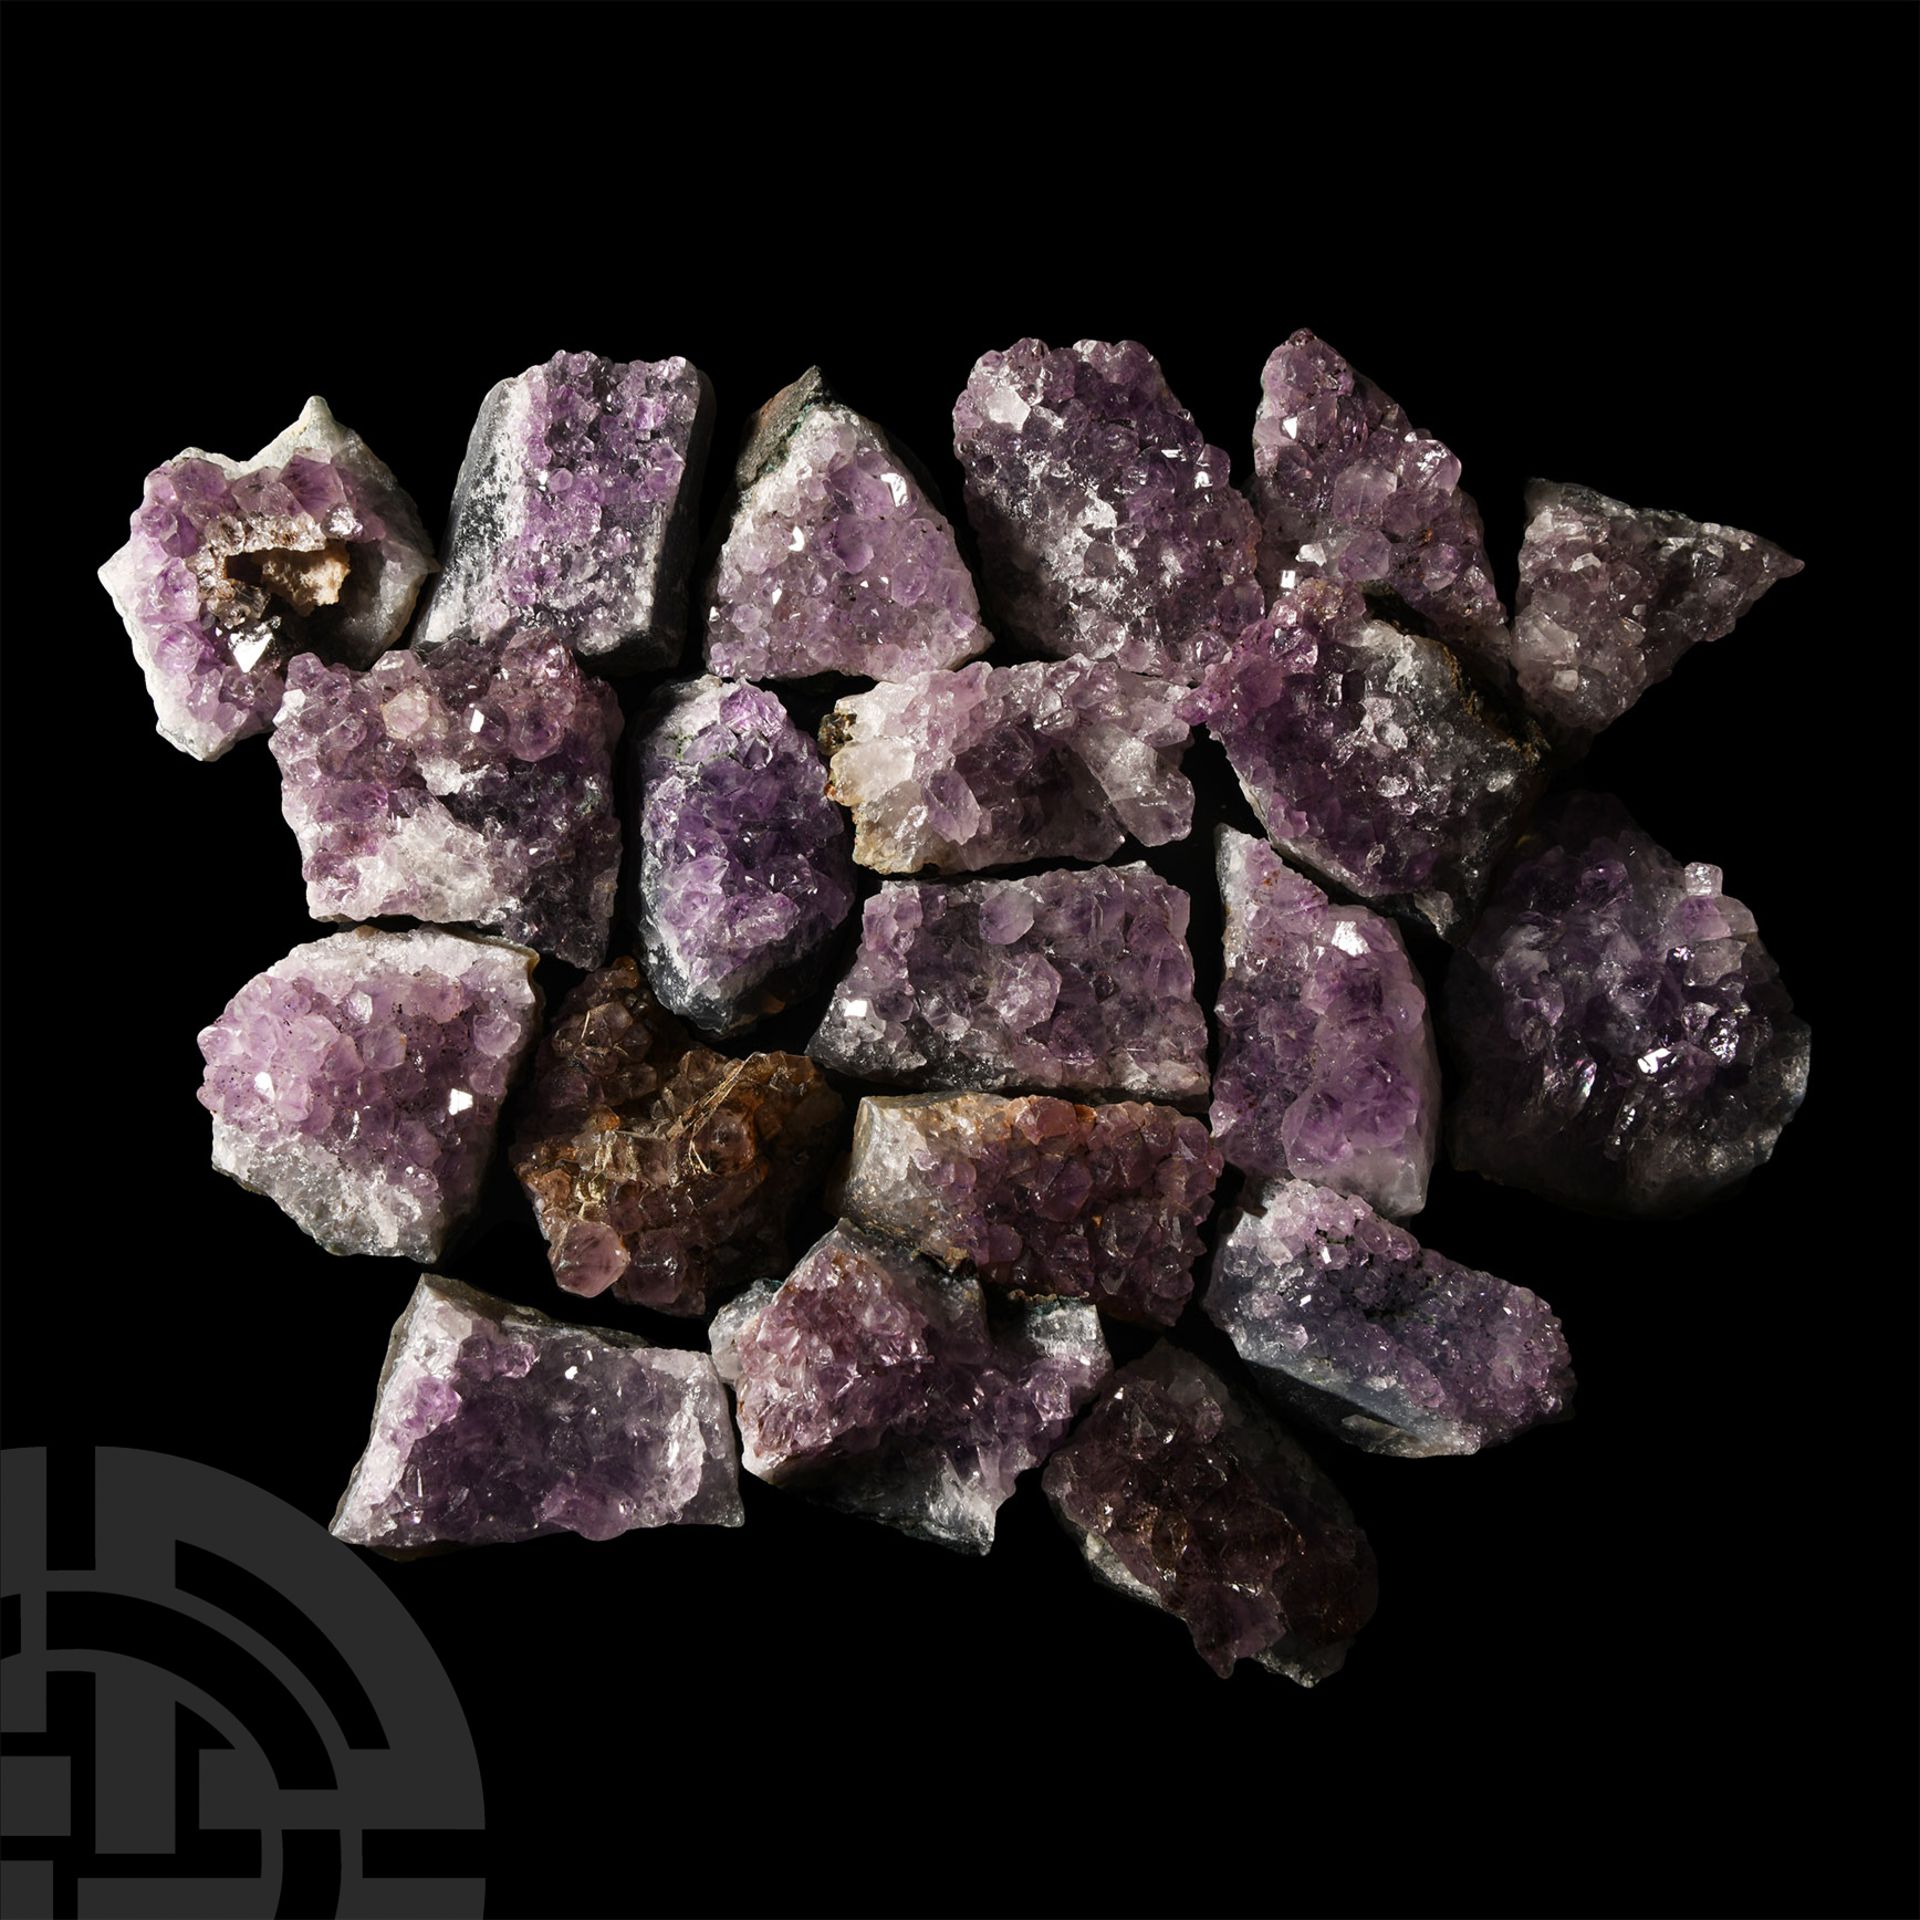 Natural History - Medium Amethyst Crystal Geode Section Group [20].